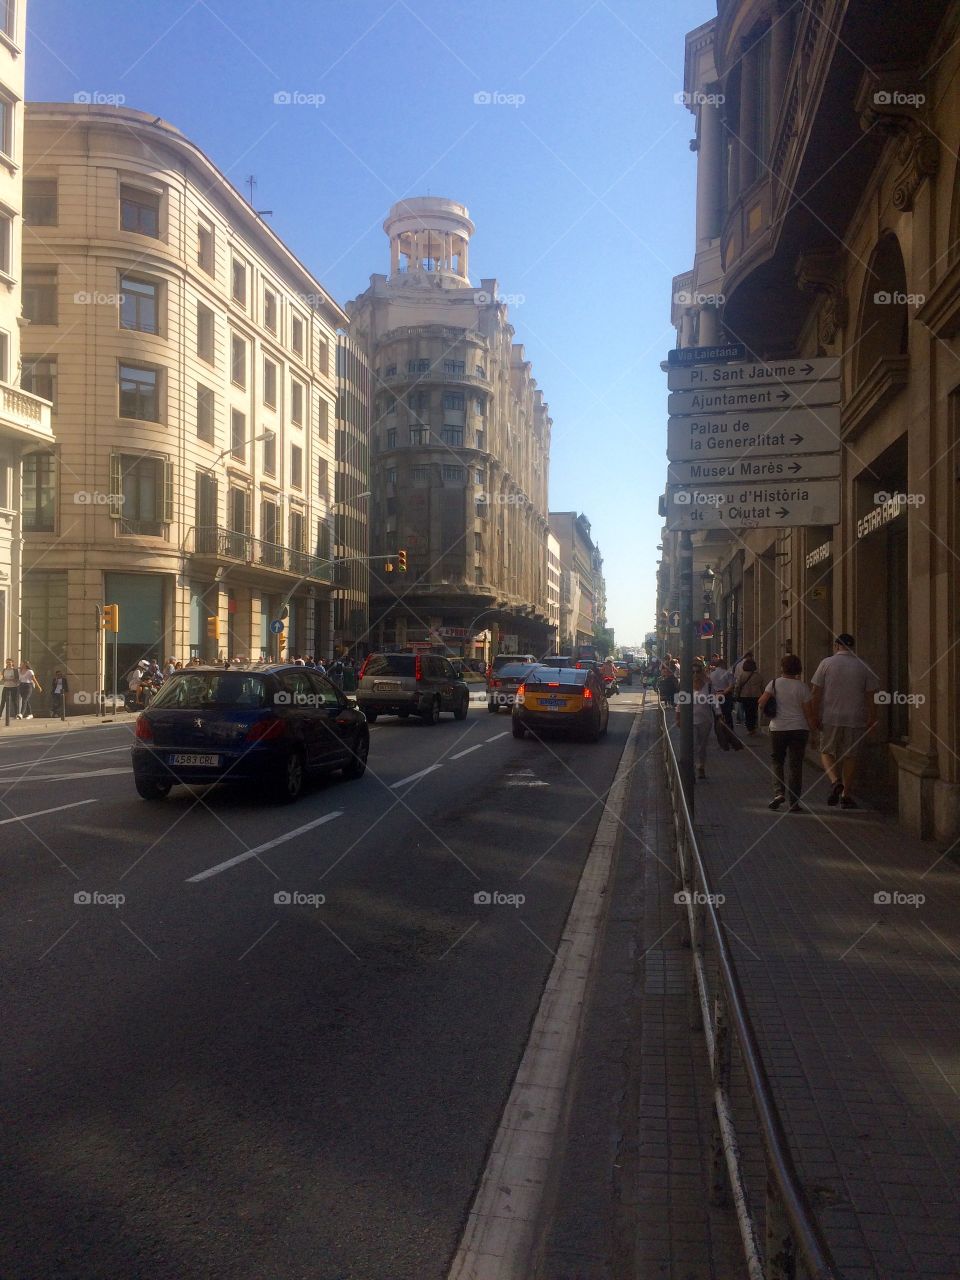 Street view of a busy daytime scene in Barcelona city centre in Spain on a sunny Autumn day